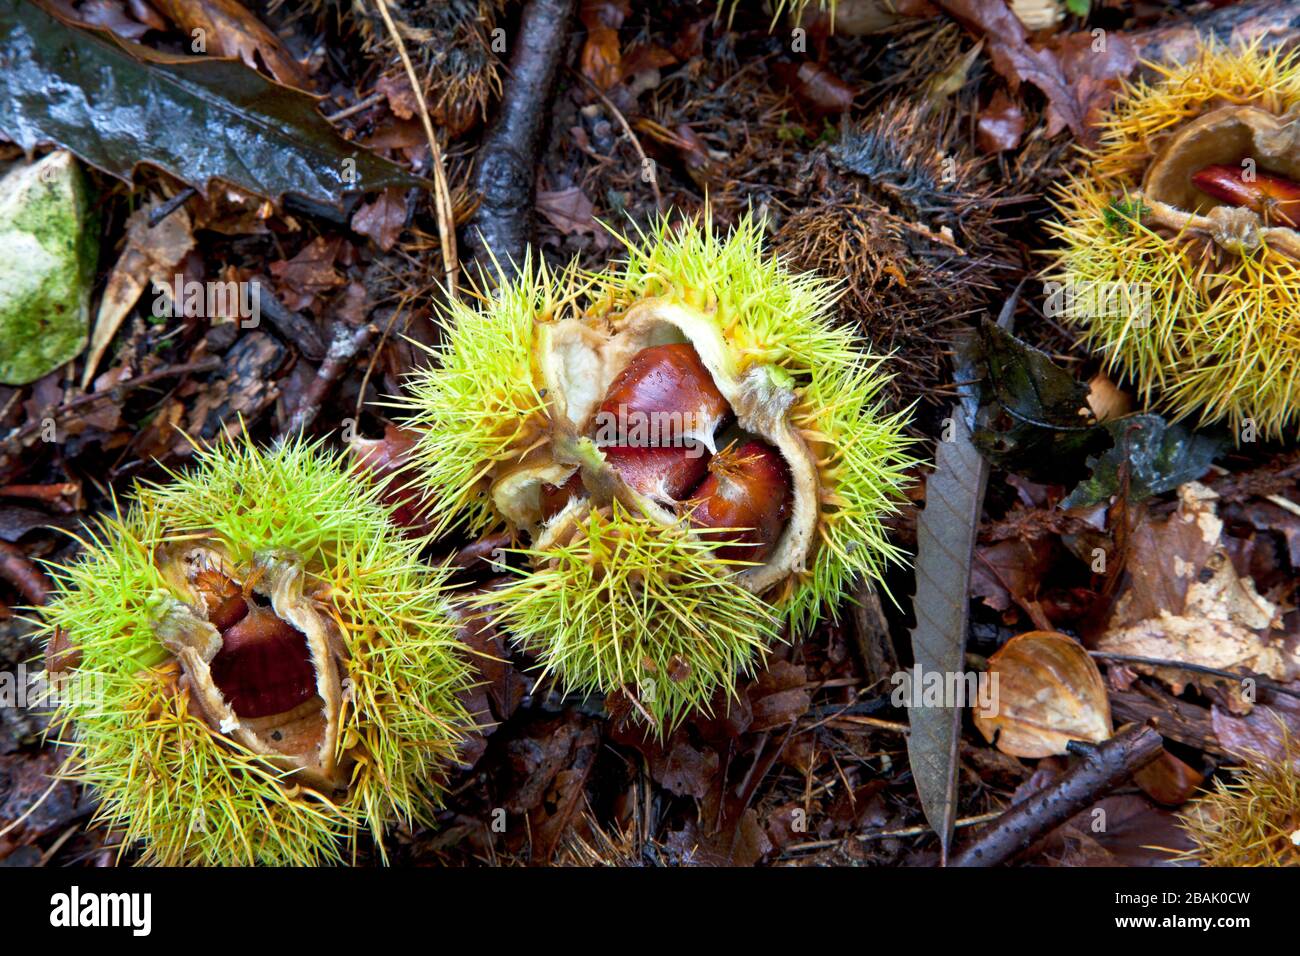 Fallen sweet chestnuts in Grovely Wood in Wiltshire. Stock Photo